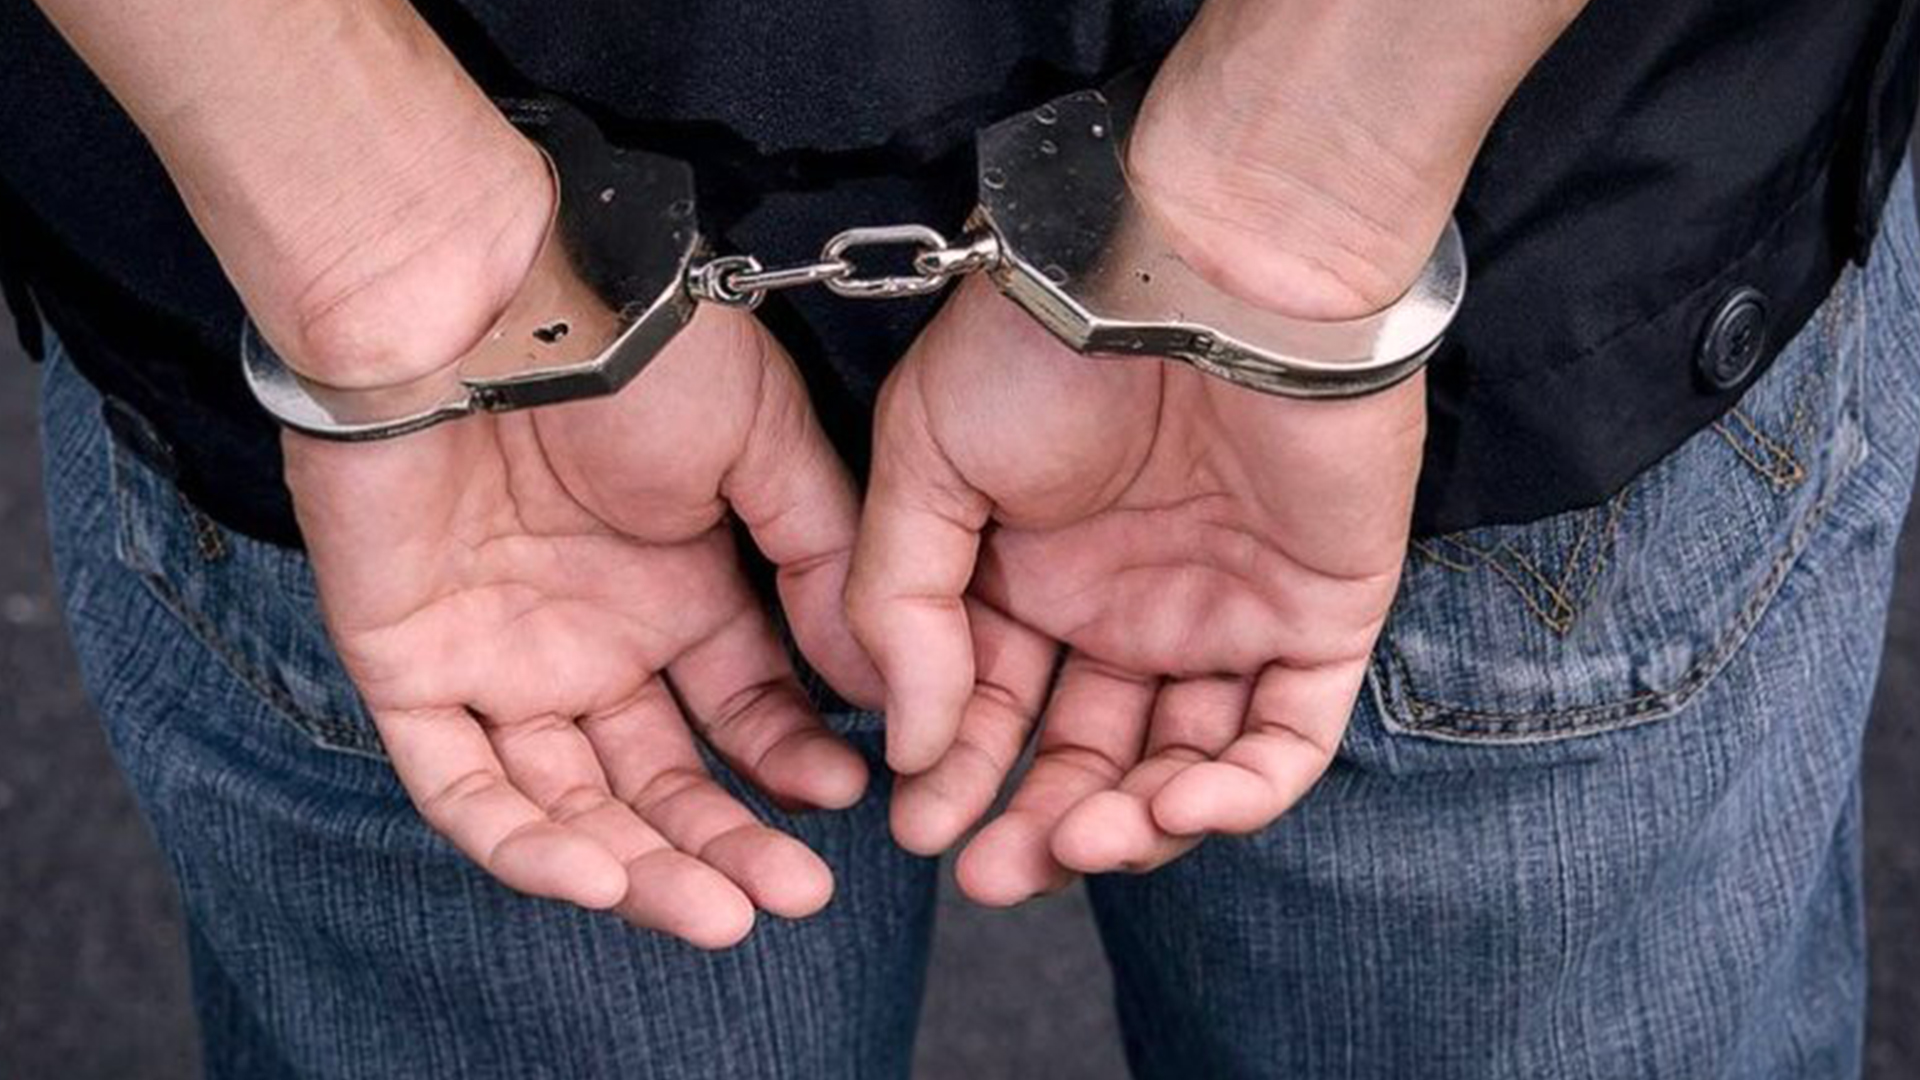 Man arrested with 50 kg of charesh